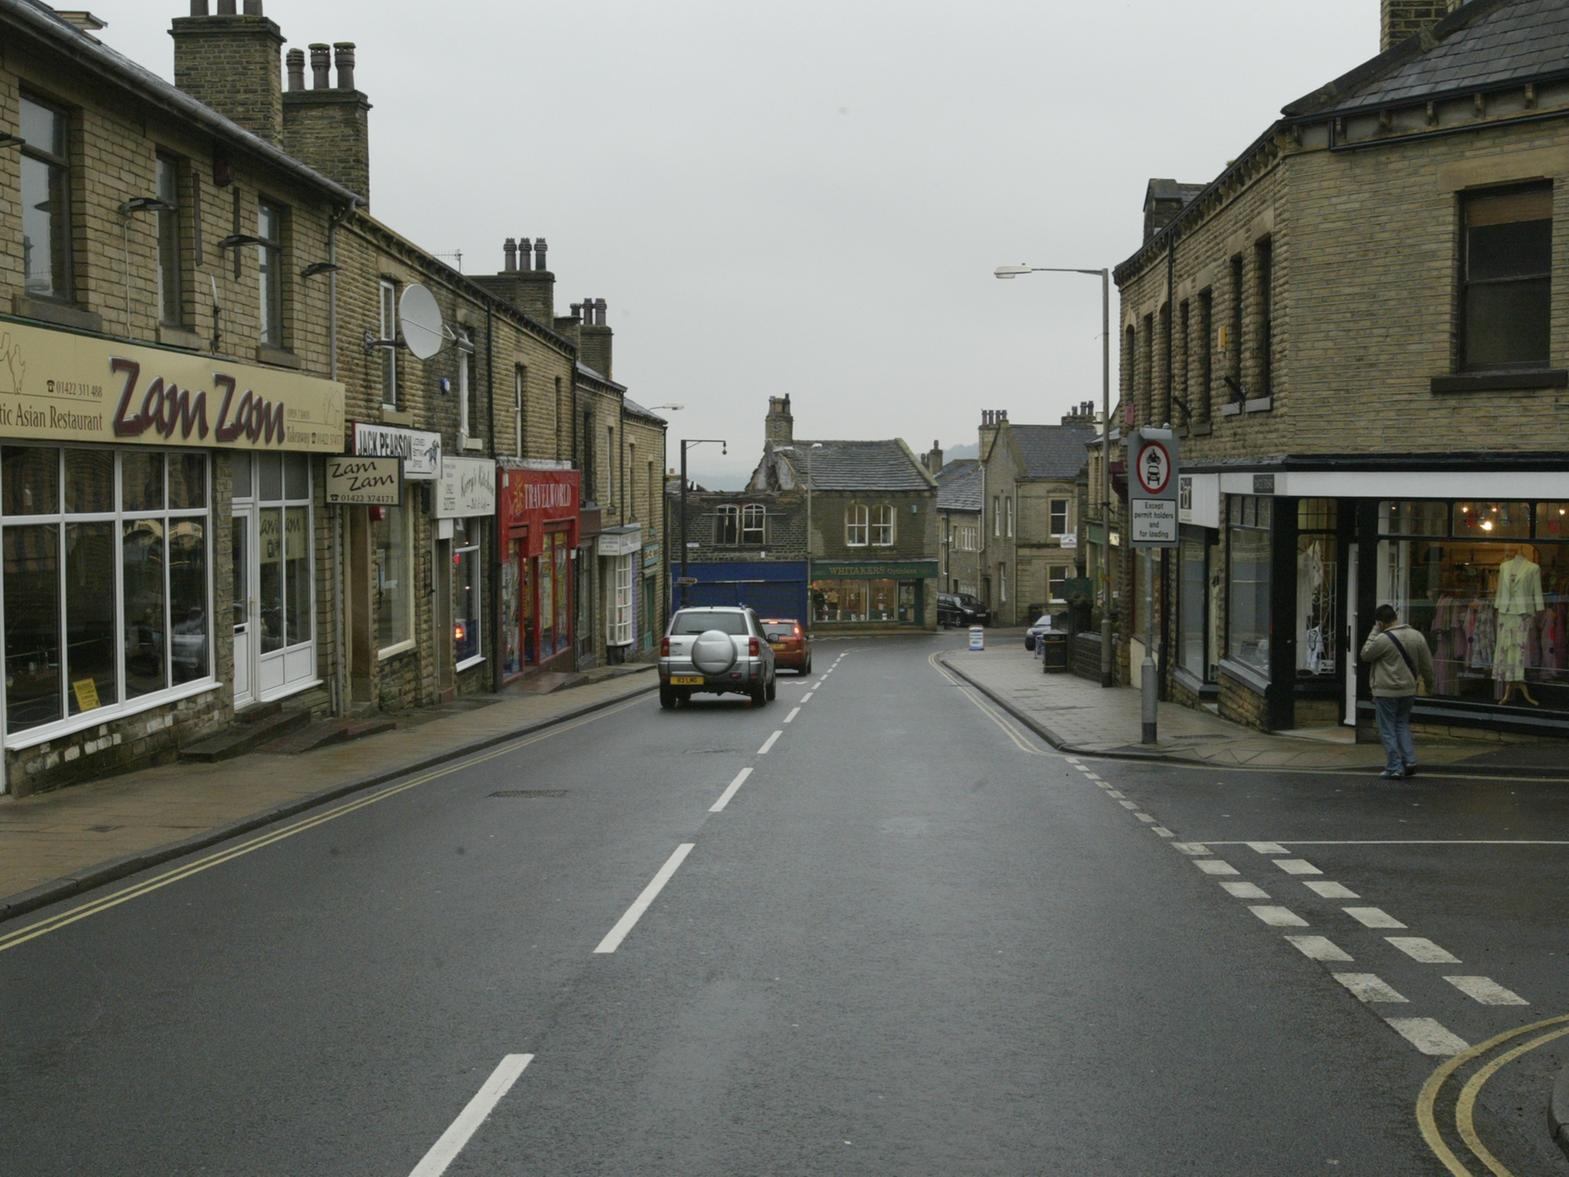 How much has Victoria Road changed since 2005?